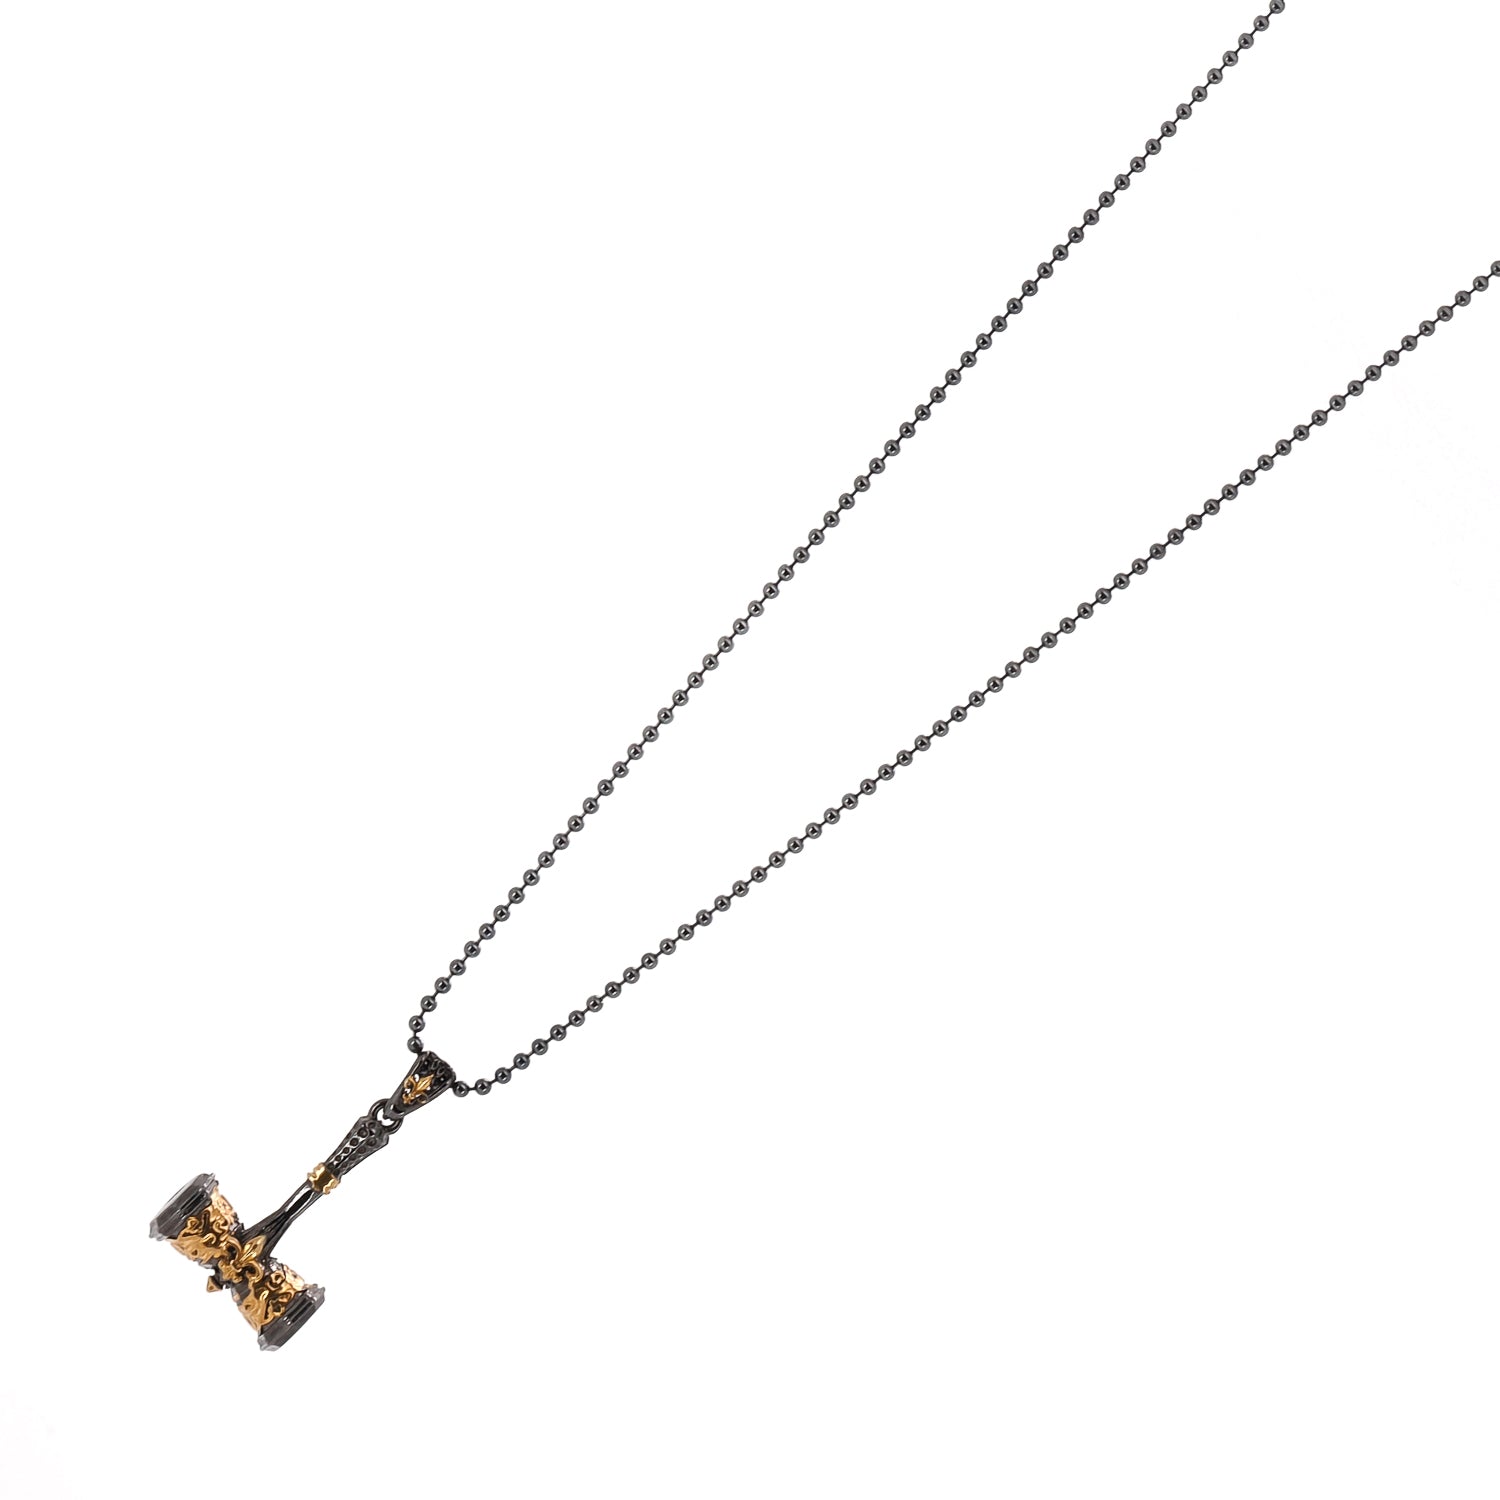 Handmade men's necklace with a sterling silver chain and a luxurious gold-plated hammer pendant